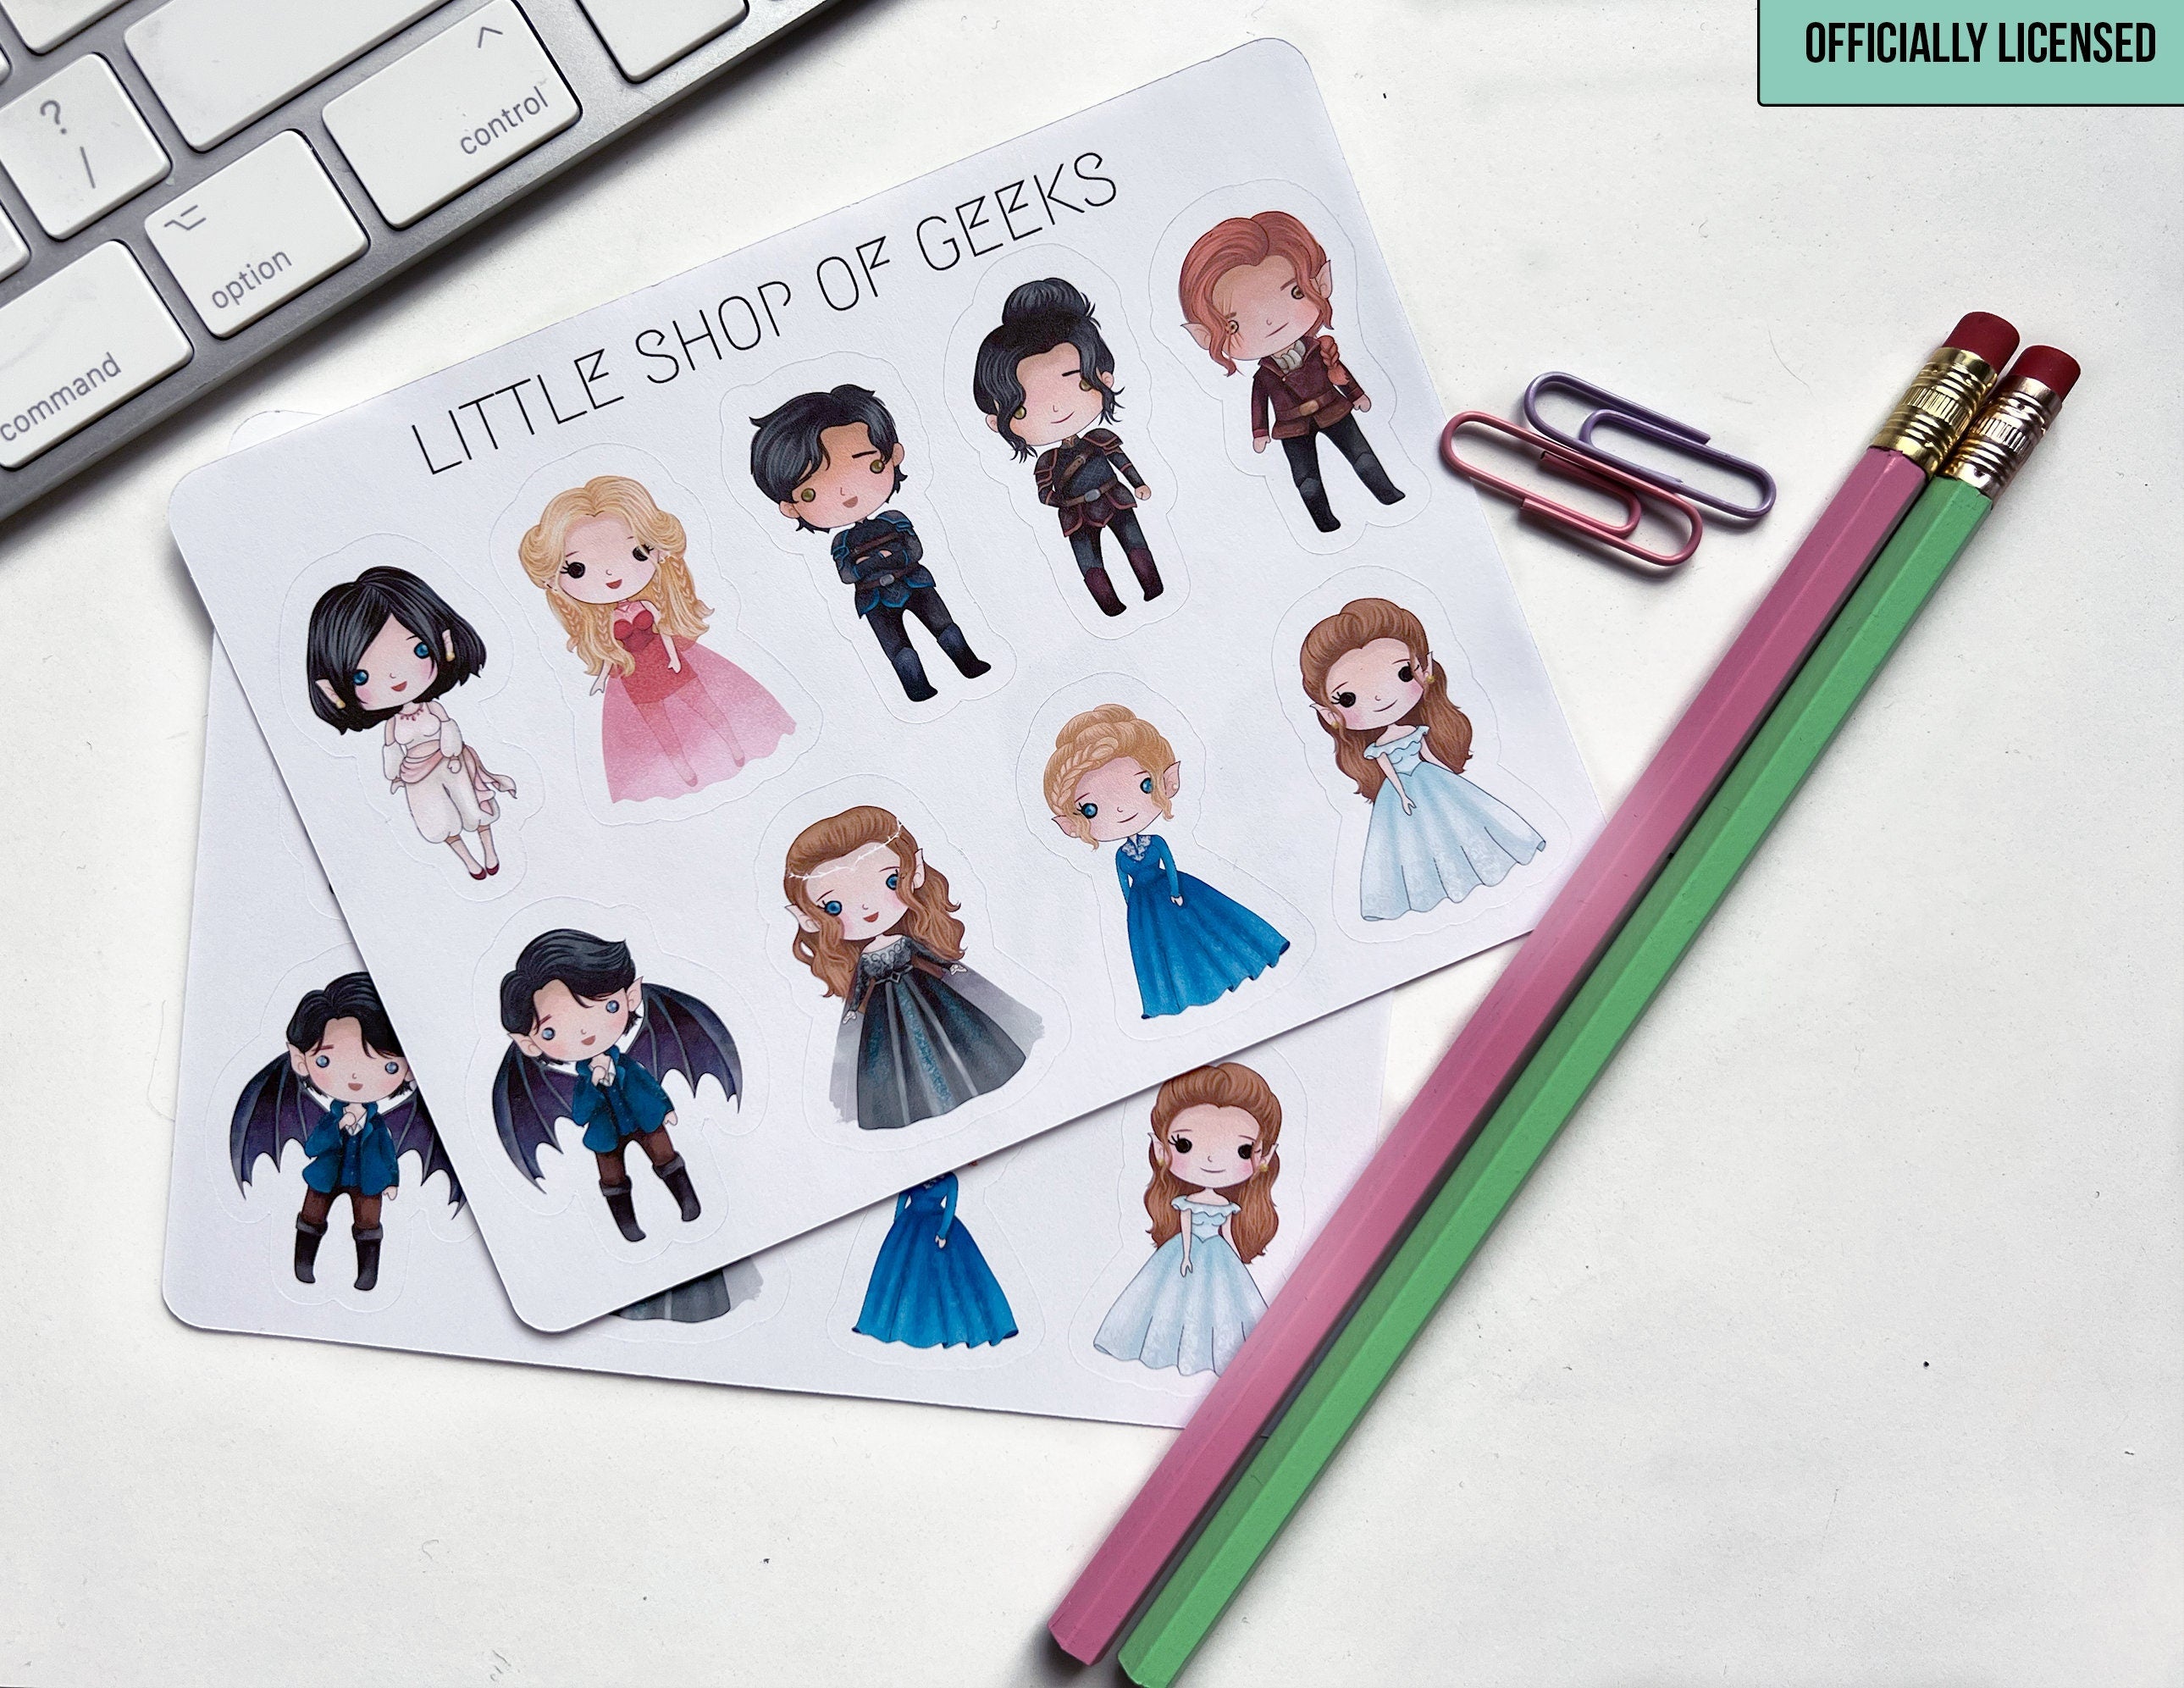 ACOTAR Sticker Sheet - Officially Licensed A Court of Thorns and Roses Sarah J Maas Rhys Waterproof Water Bottle Laptop Planner Stickers